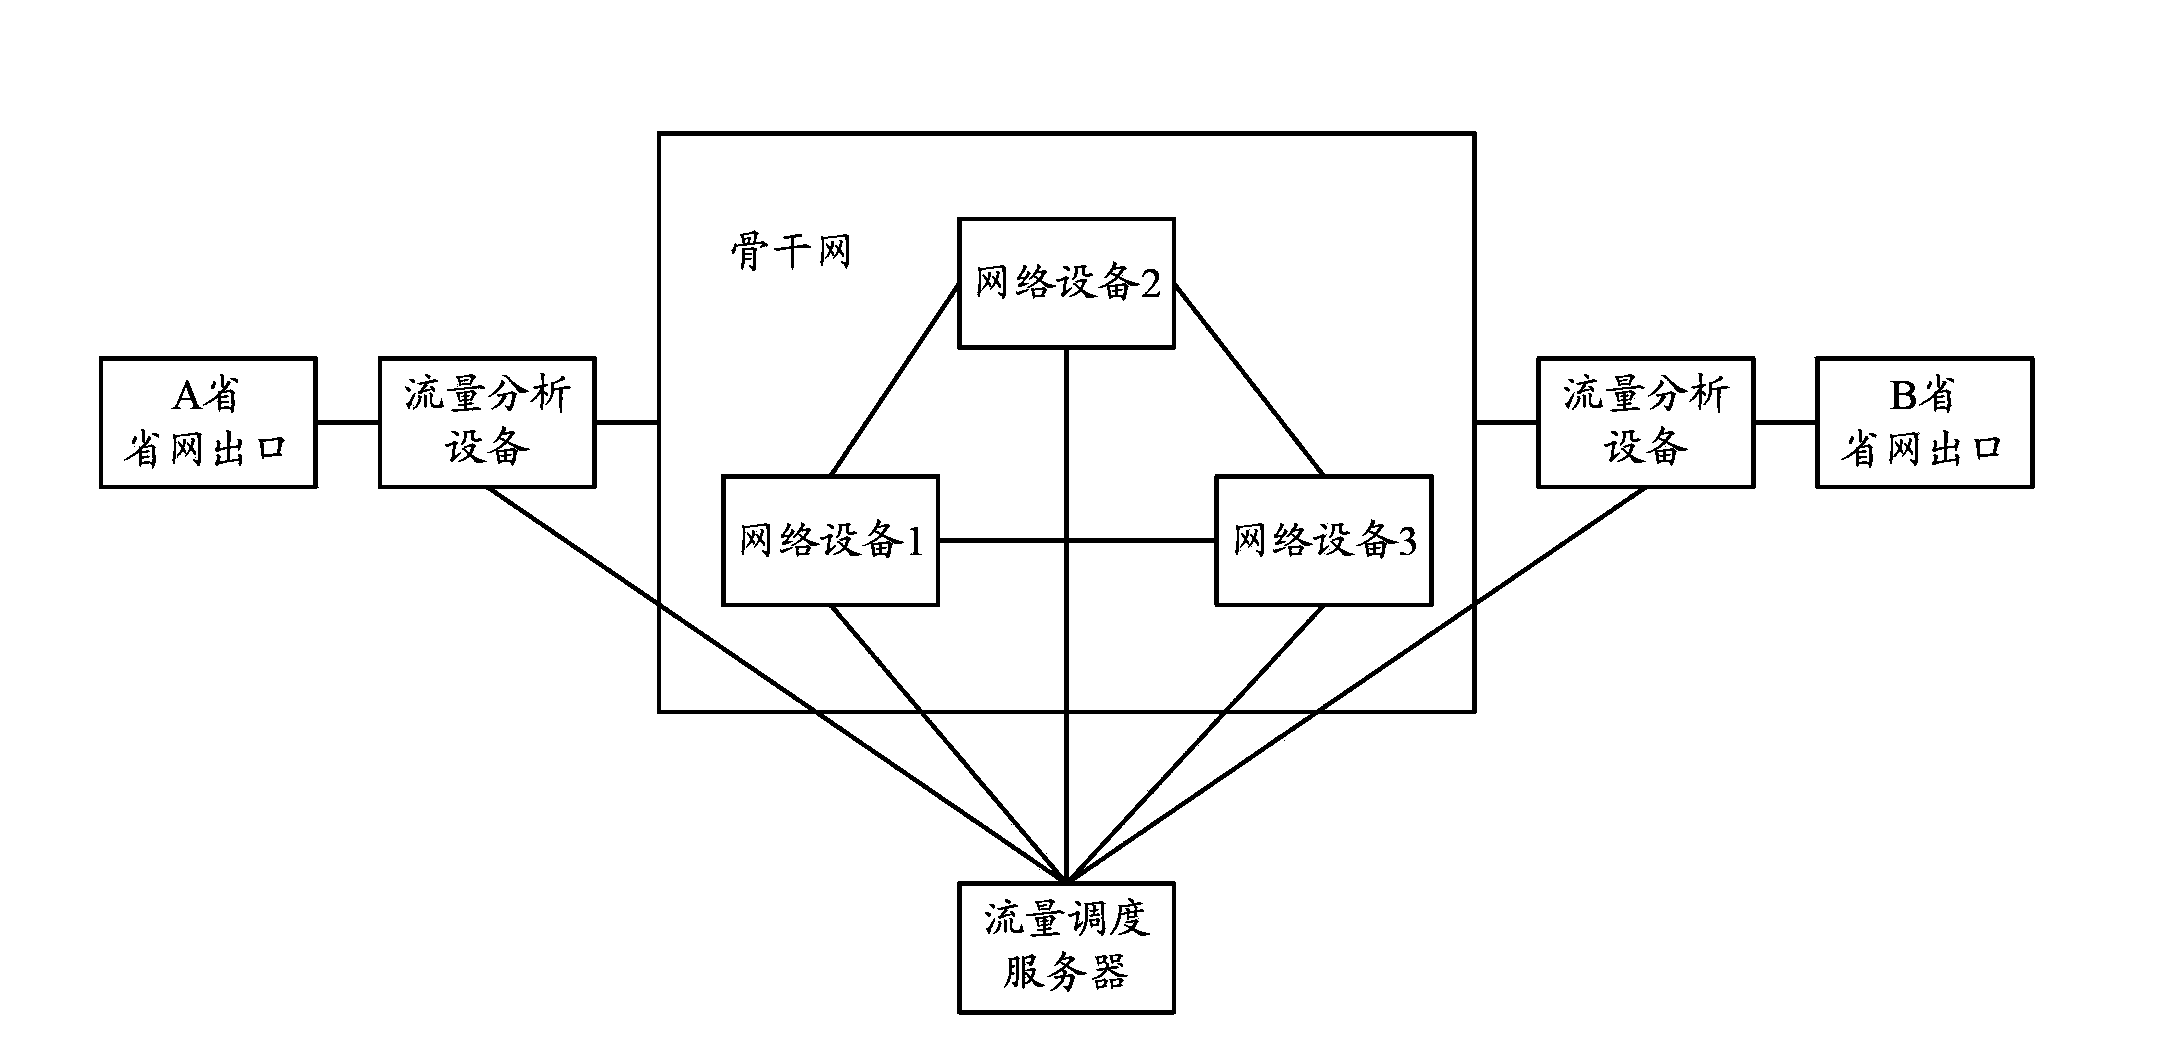 Traffic scheduling method, system and device based on service types